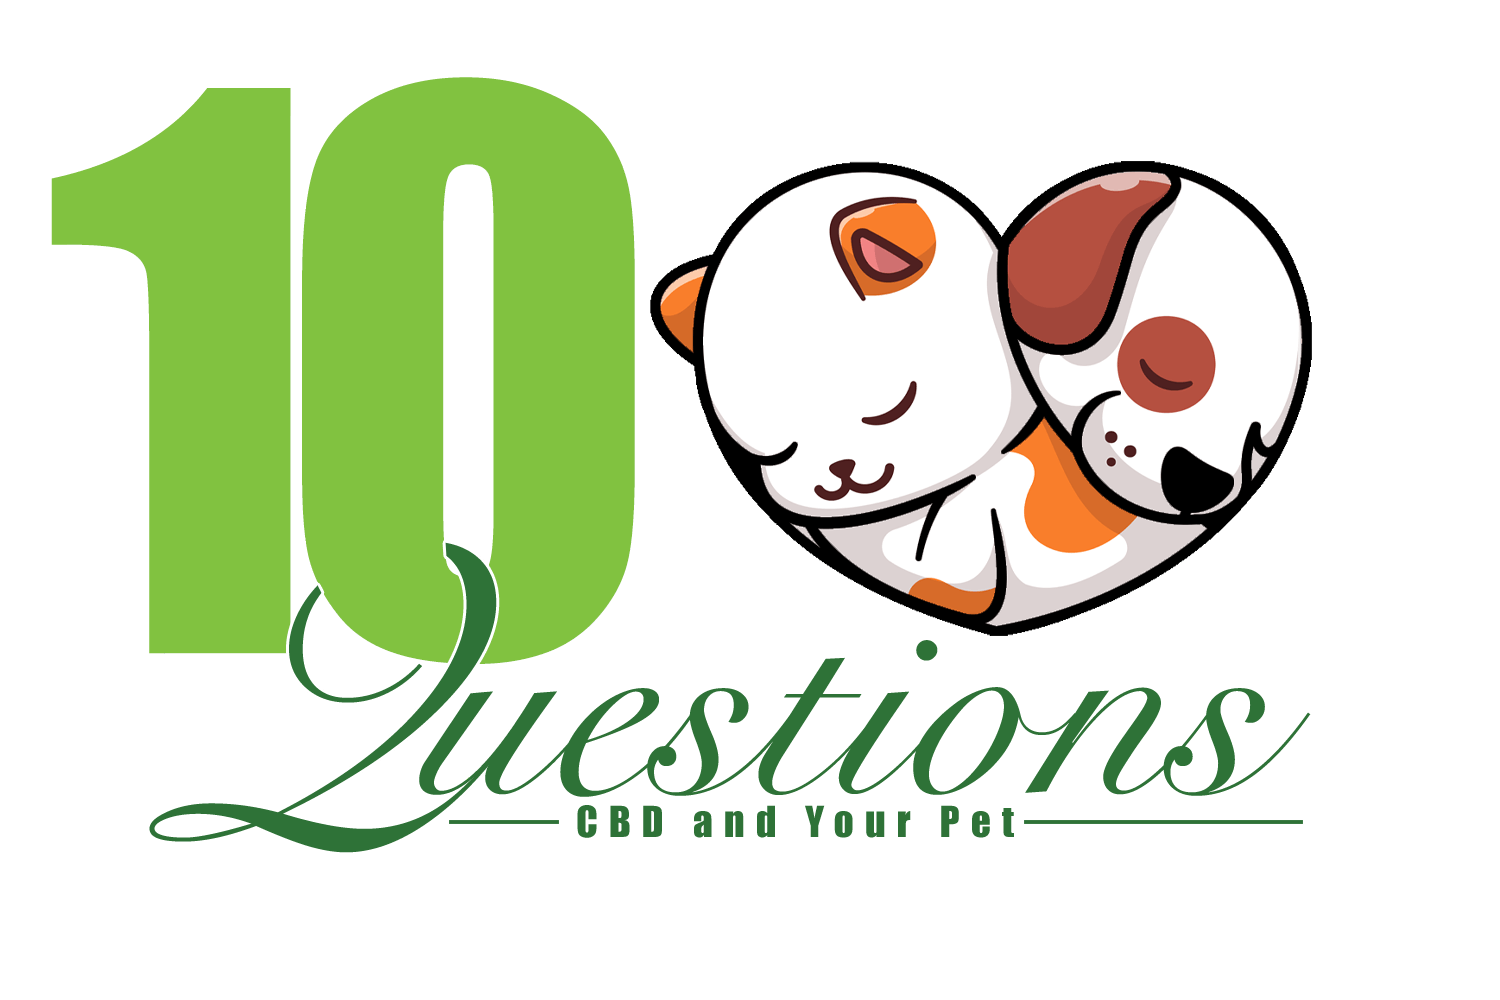 10 questions about you pet